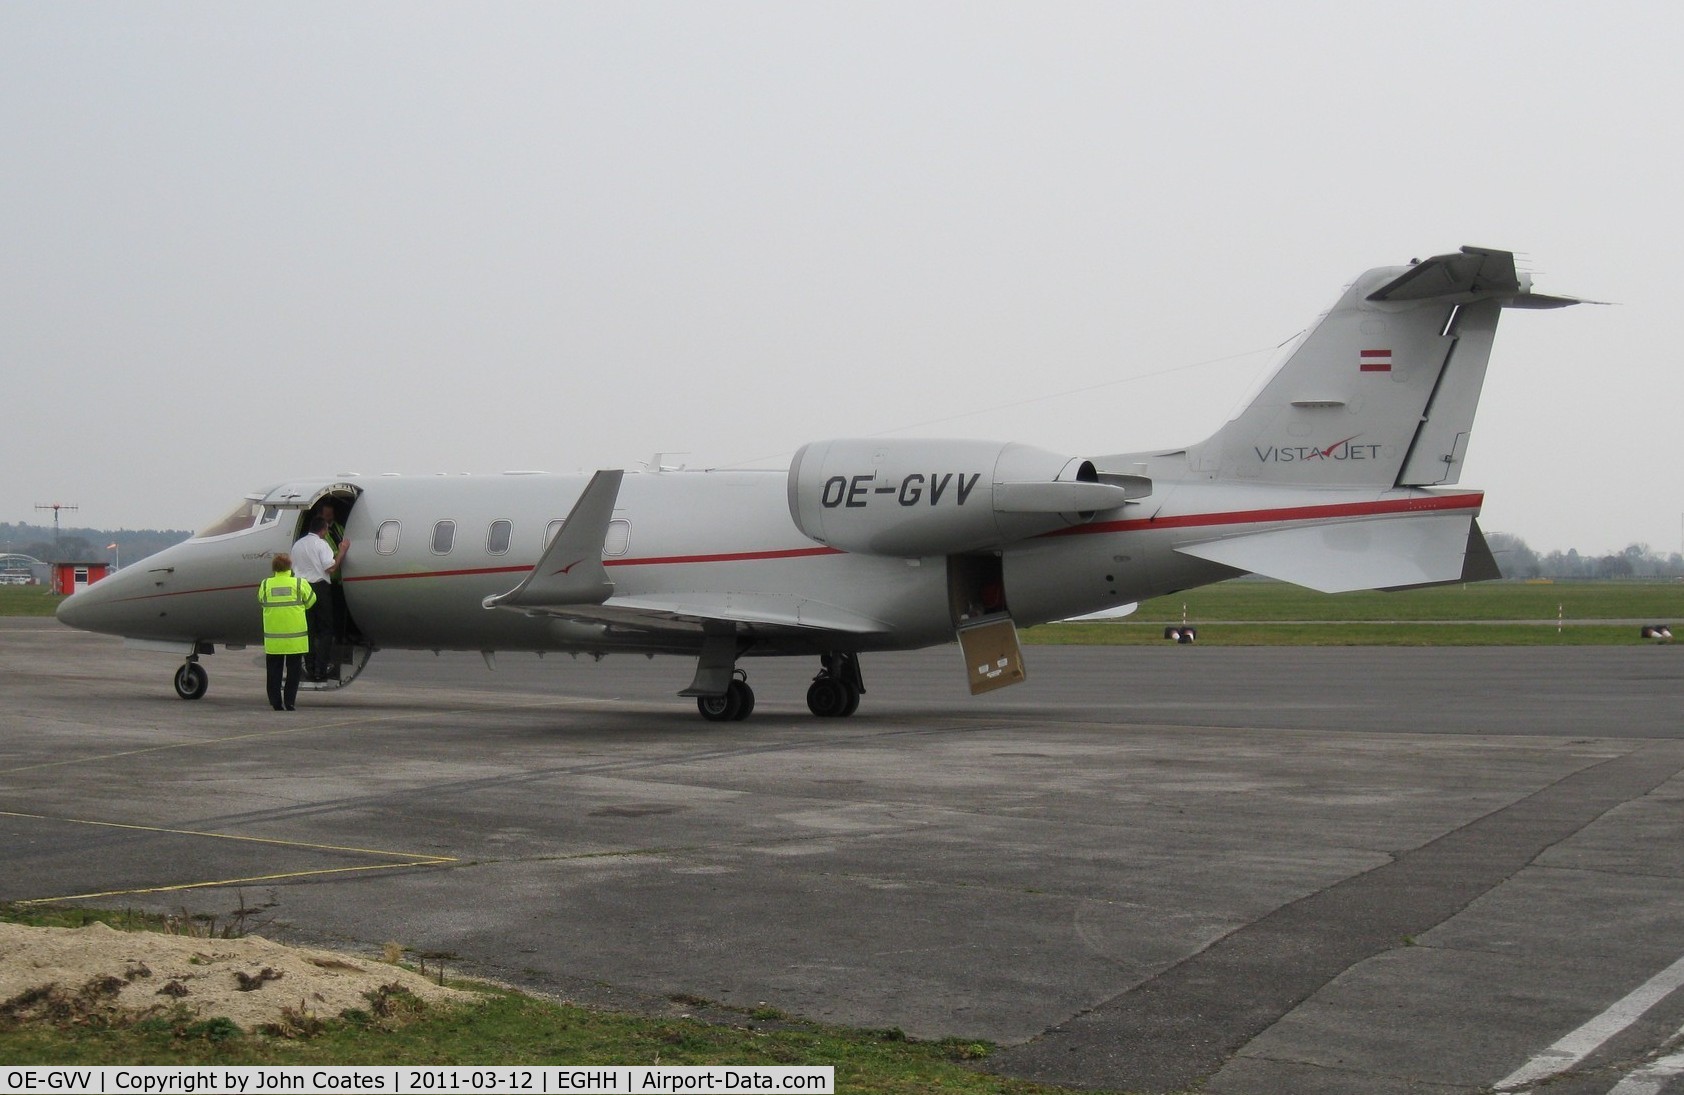 OE-GVV, 2008 Learjet 60 C/N 60-364, At Sigs